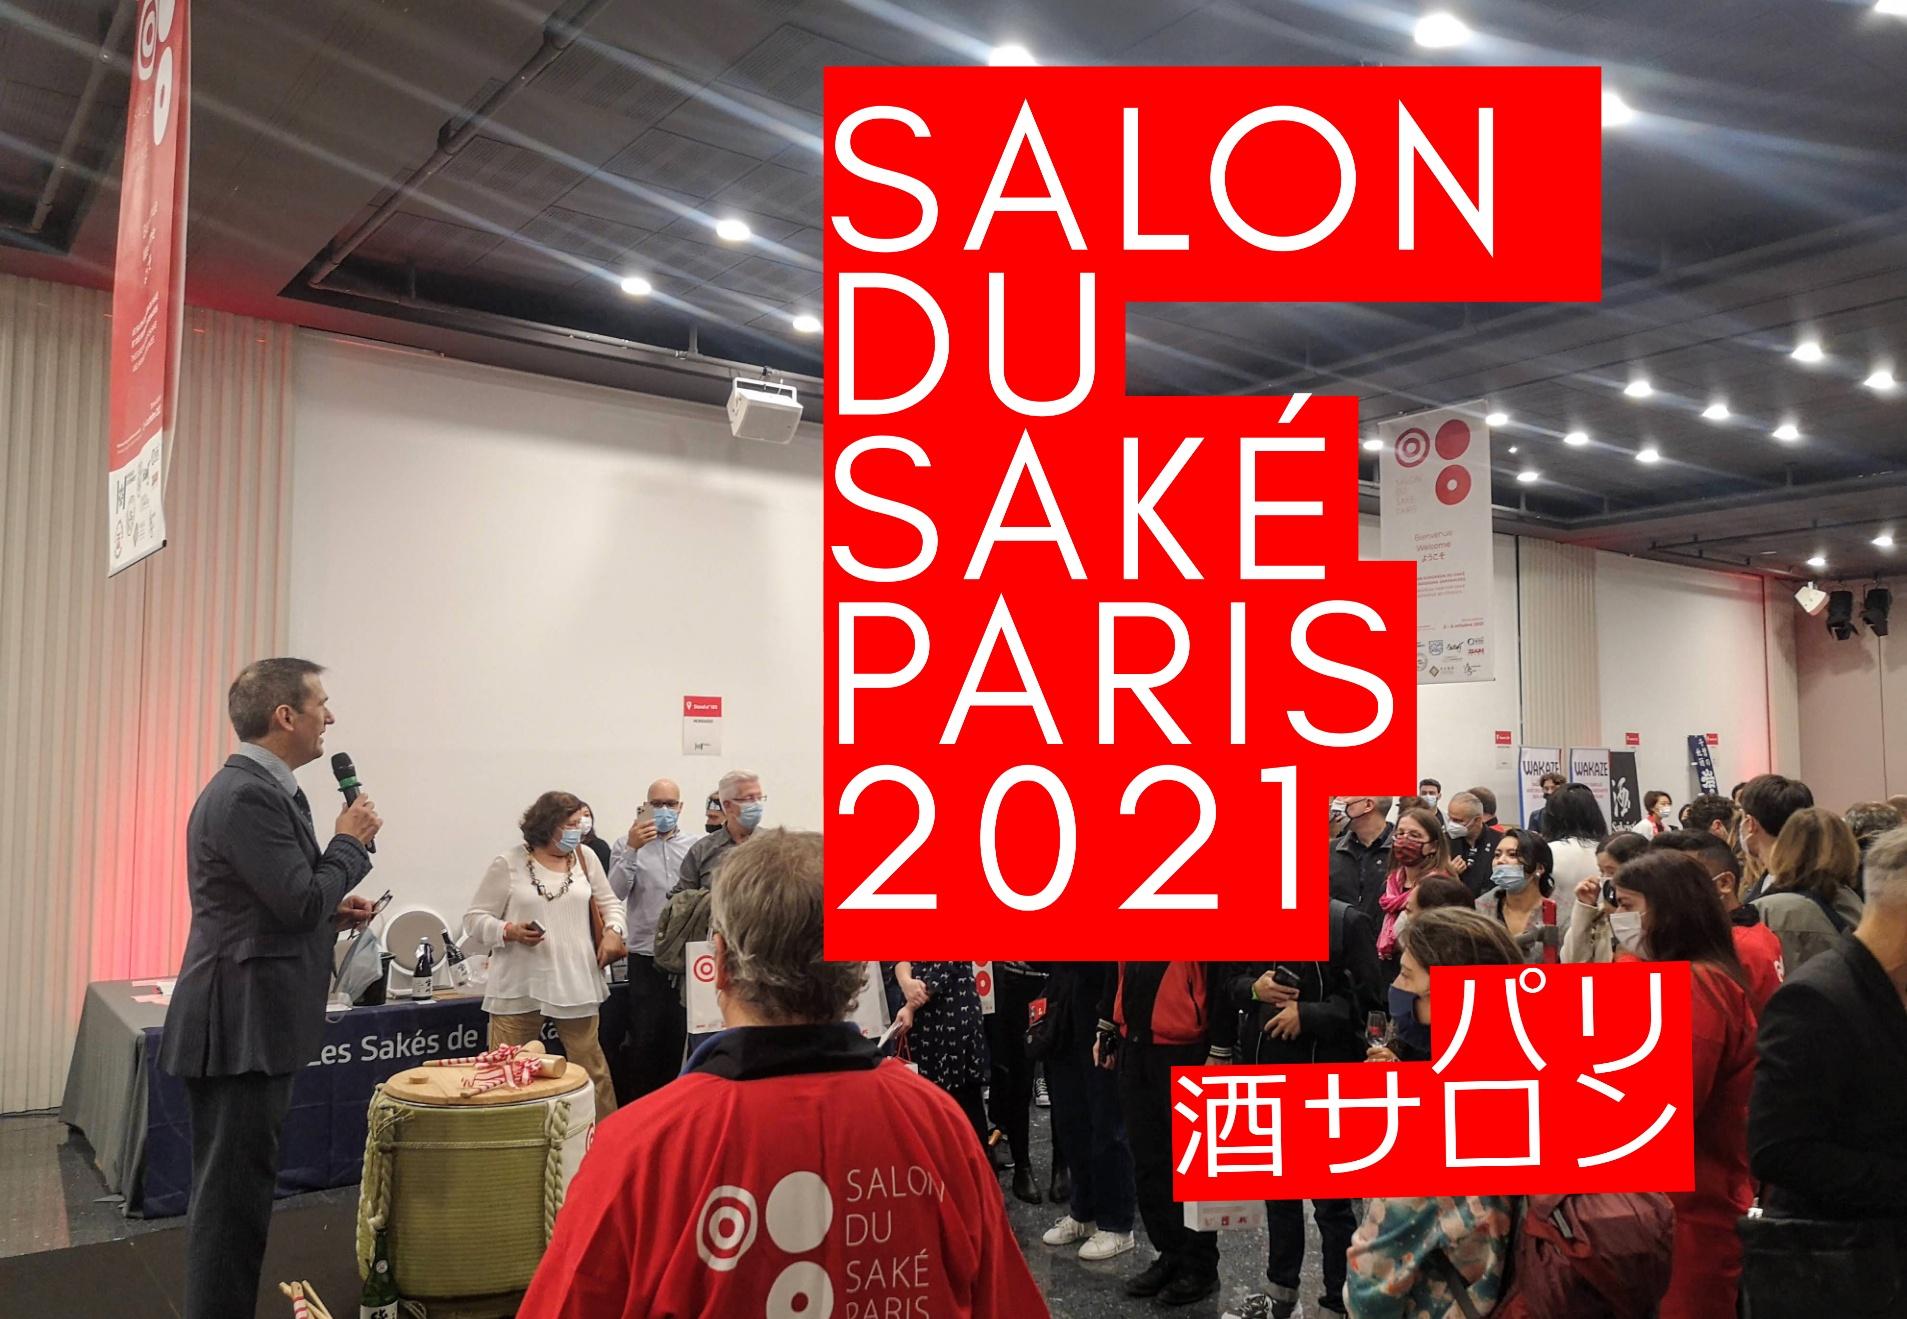 Read more about the article 欧州最大の日本酒イベント・Salon du Saké 2021 パリ酒サロン開催！